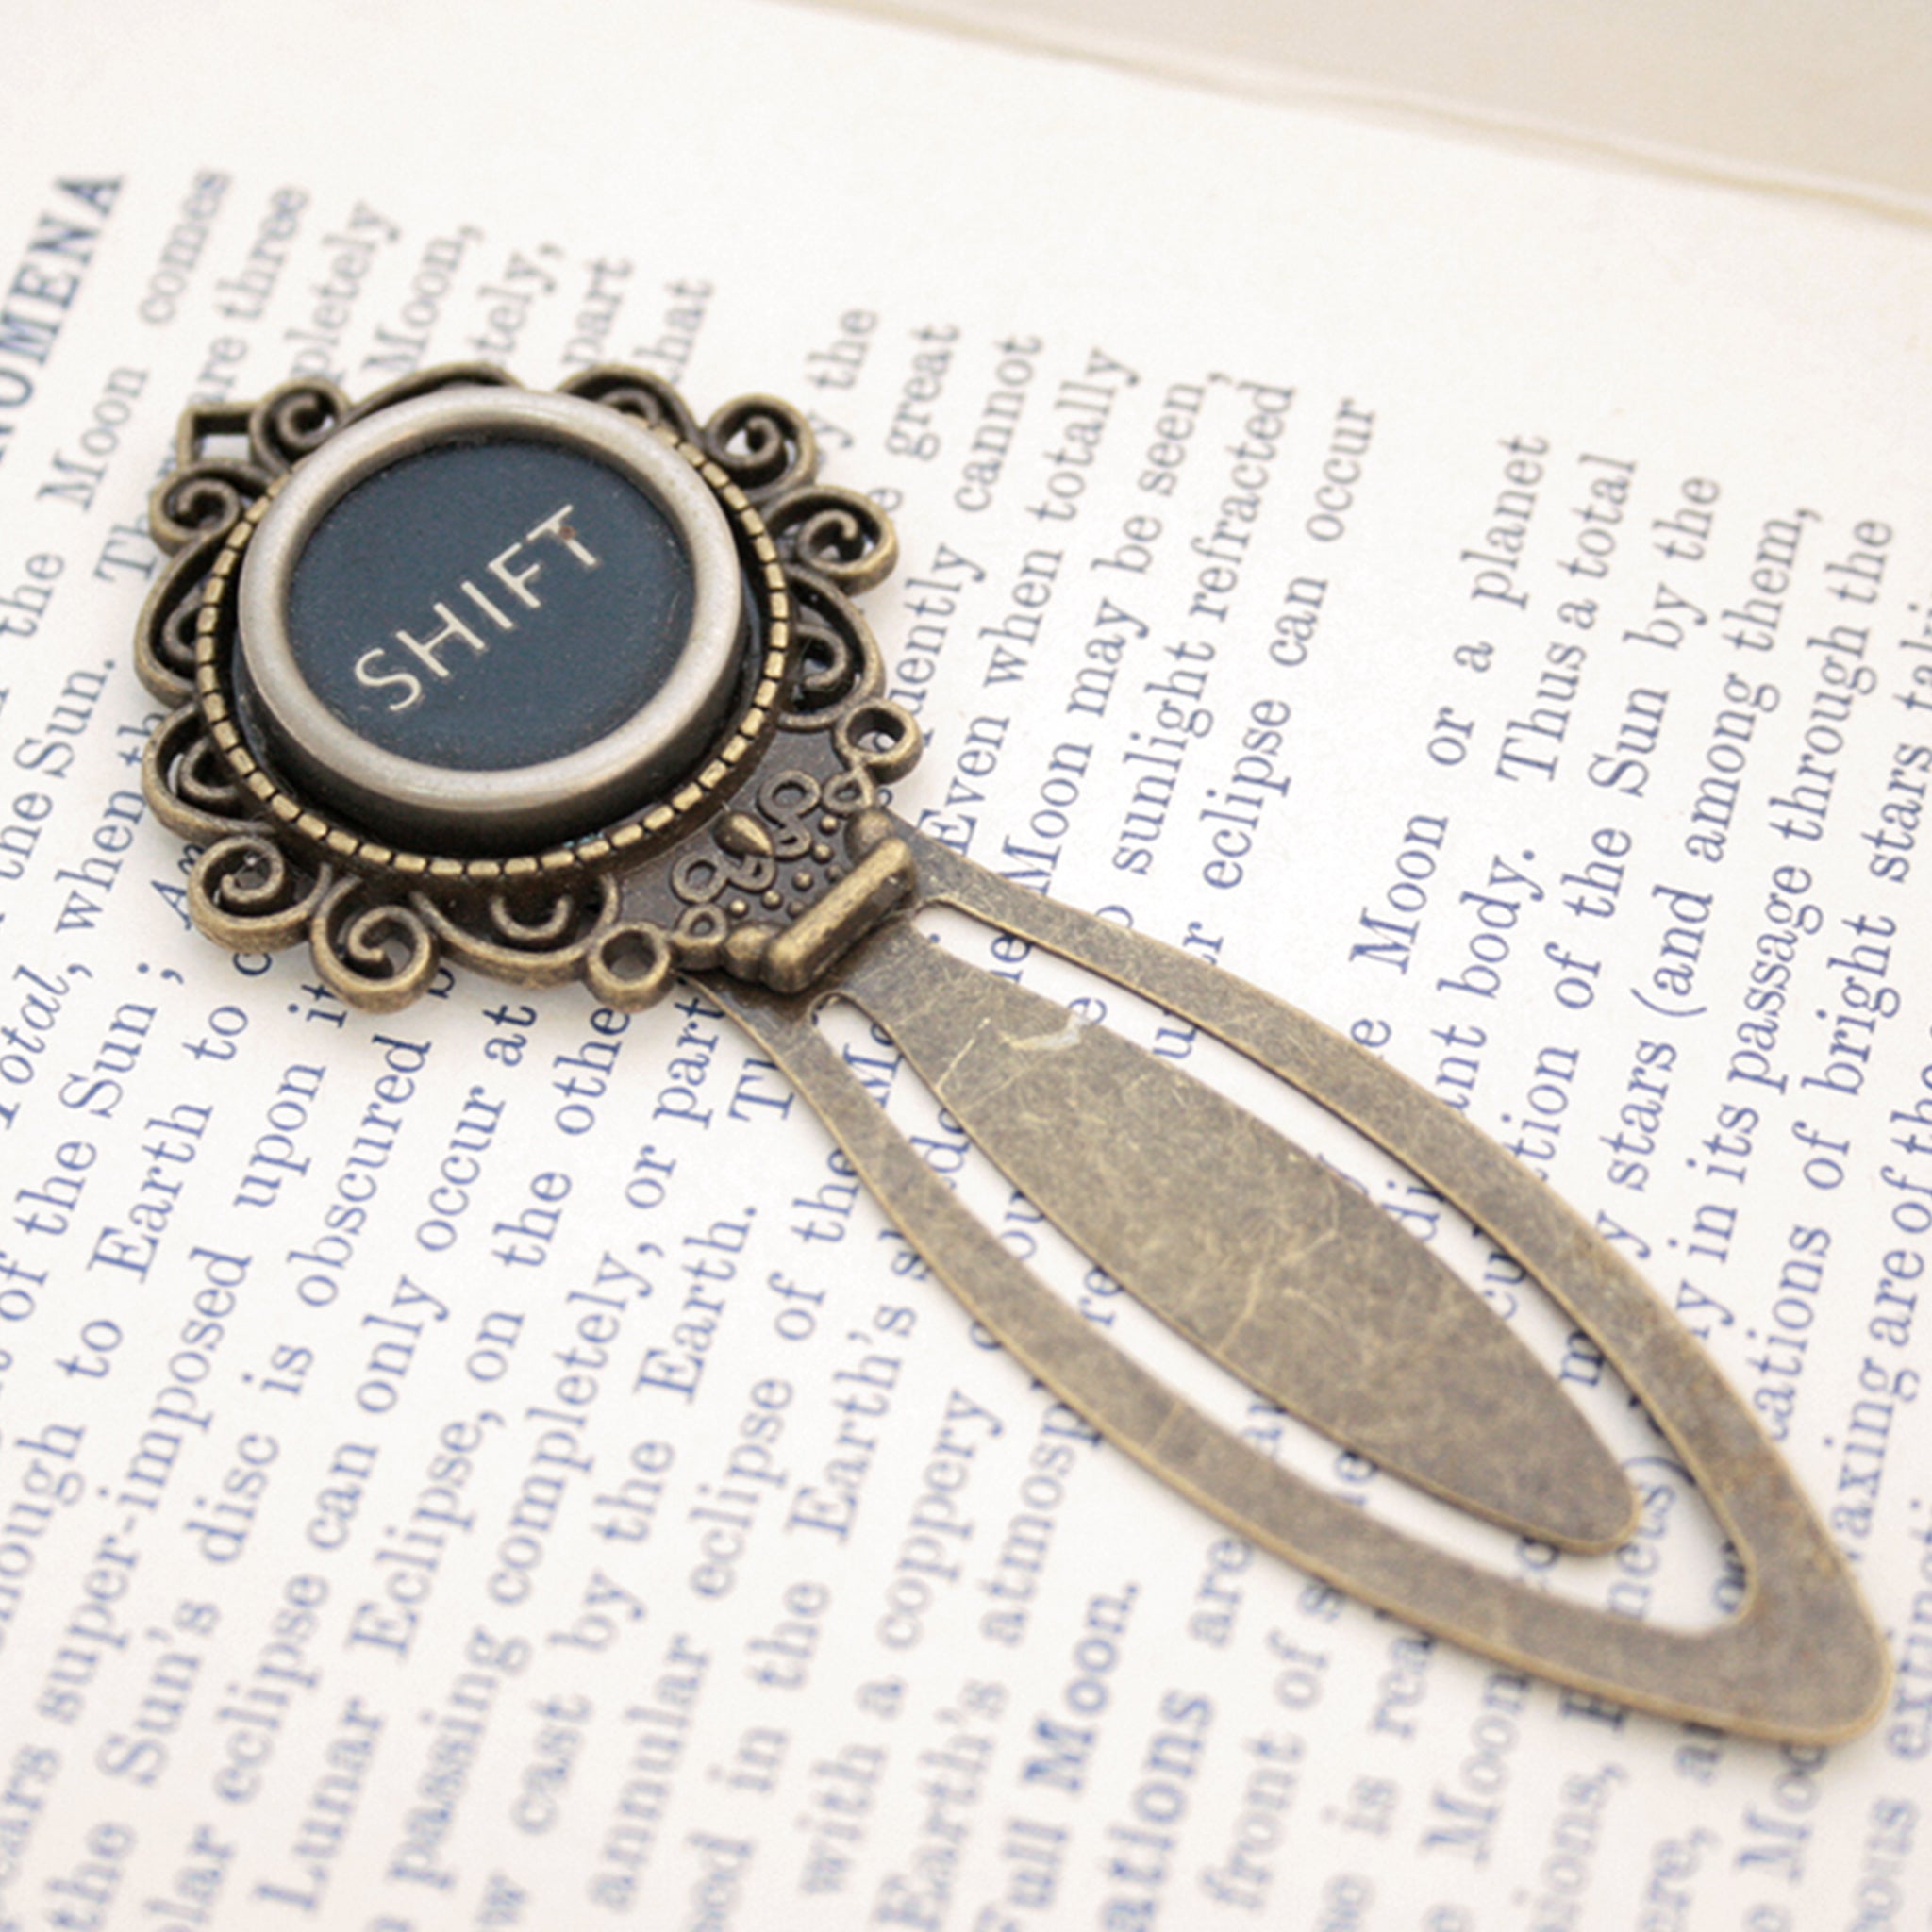 Metal bookmark made of real Shift Key from the typewriter in a book